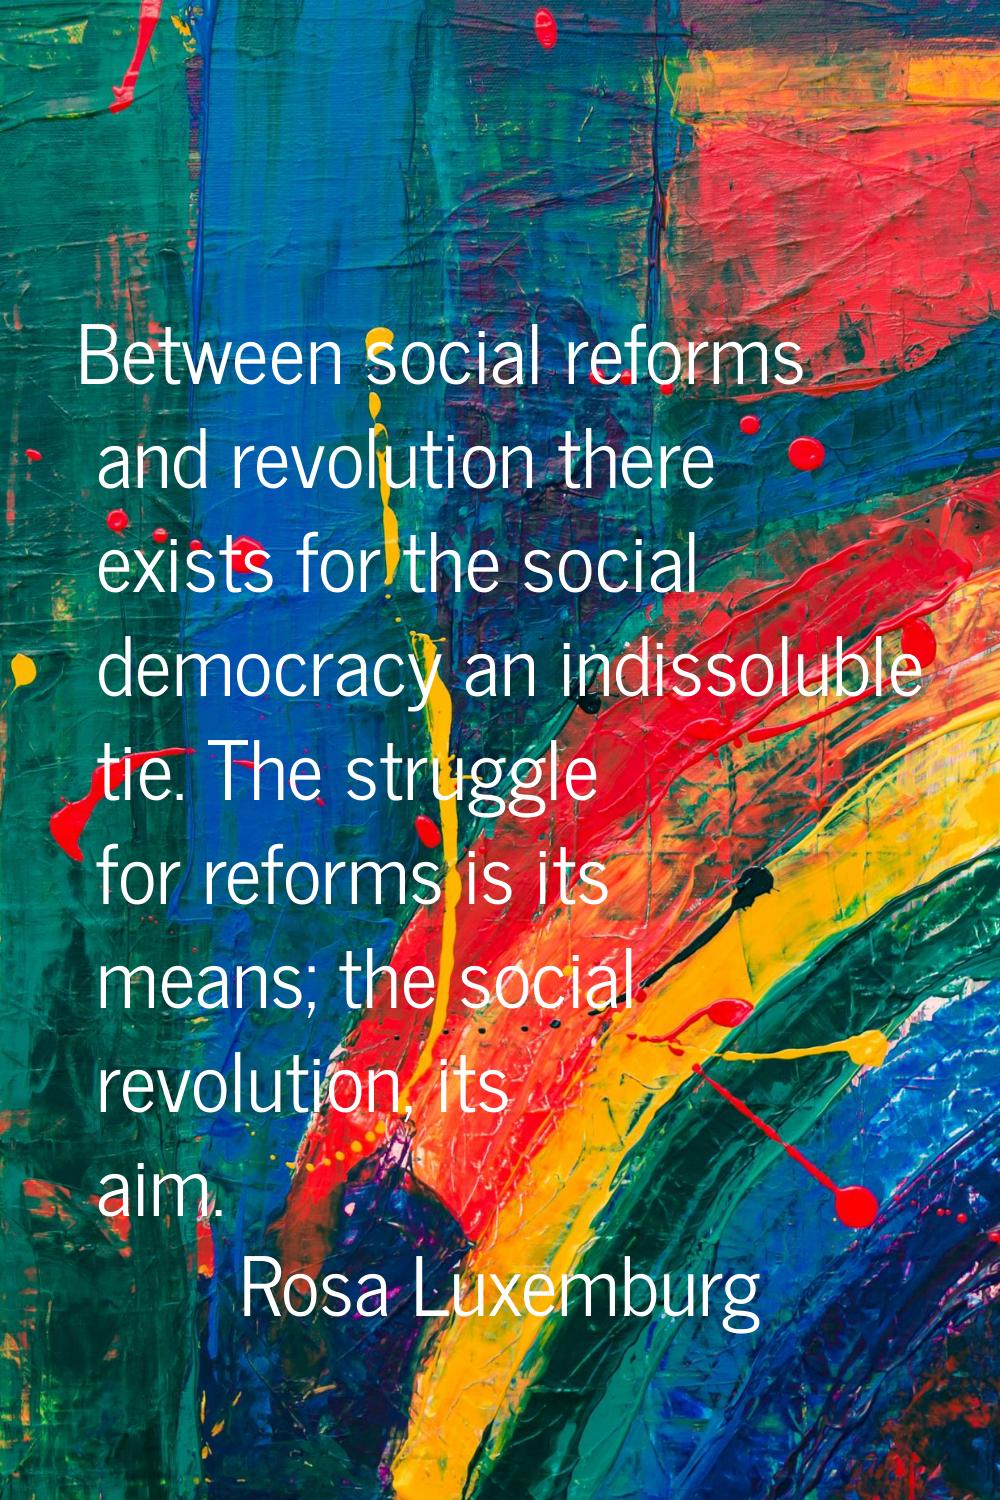 Between social reforms and revolution there exists for the social democracy an indissoluble tie. Th